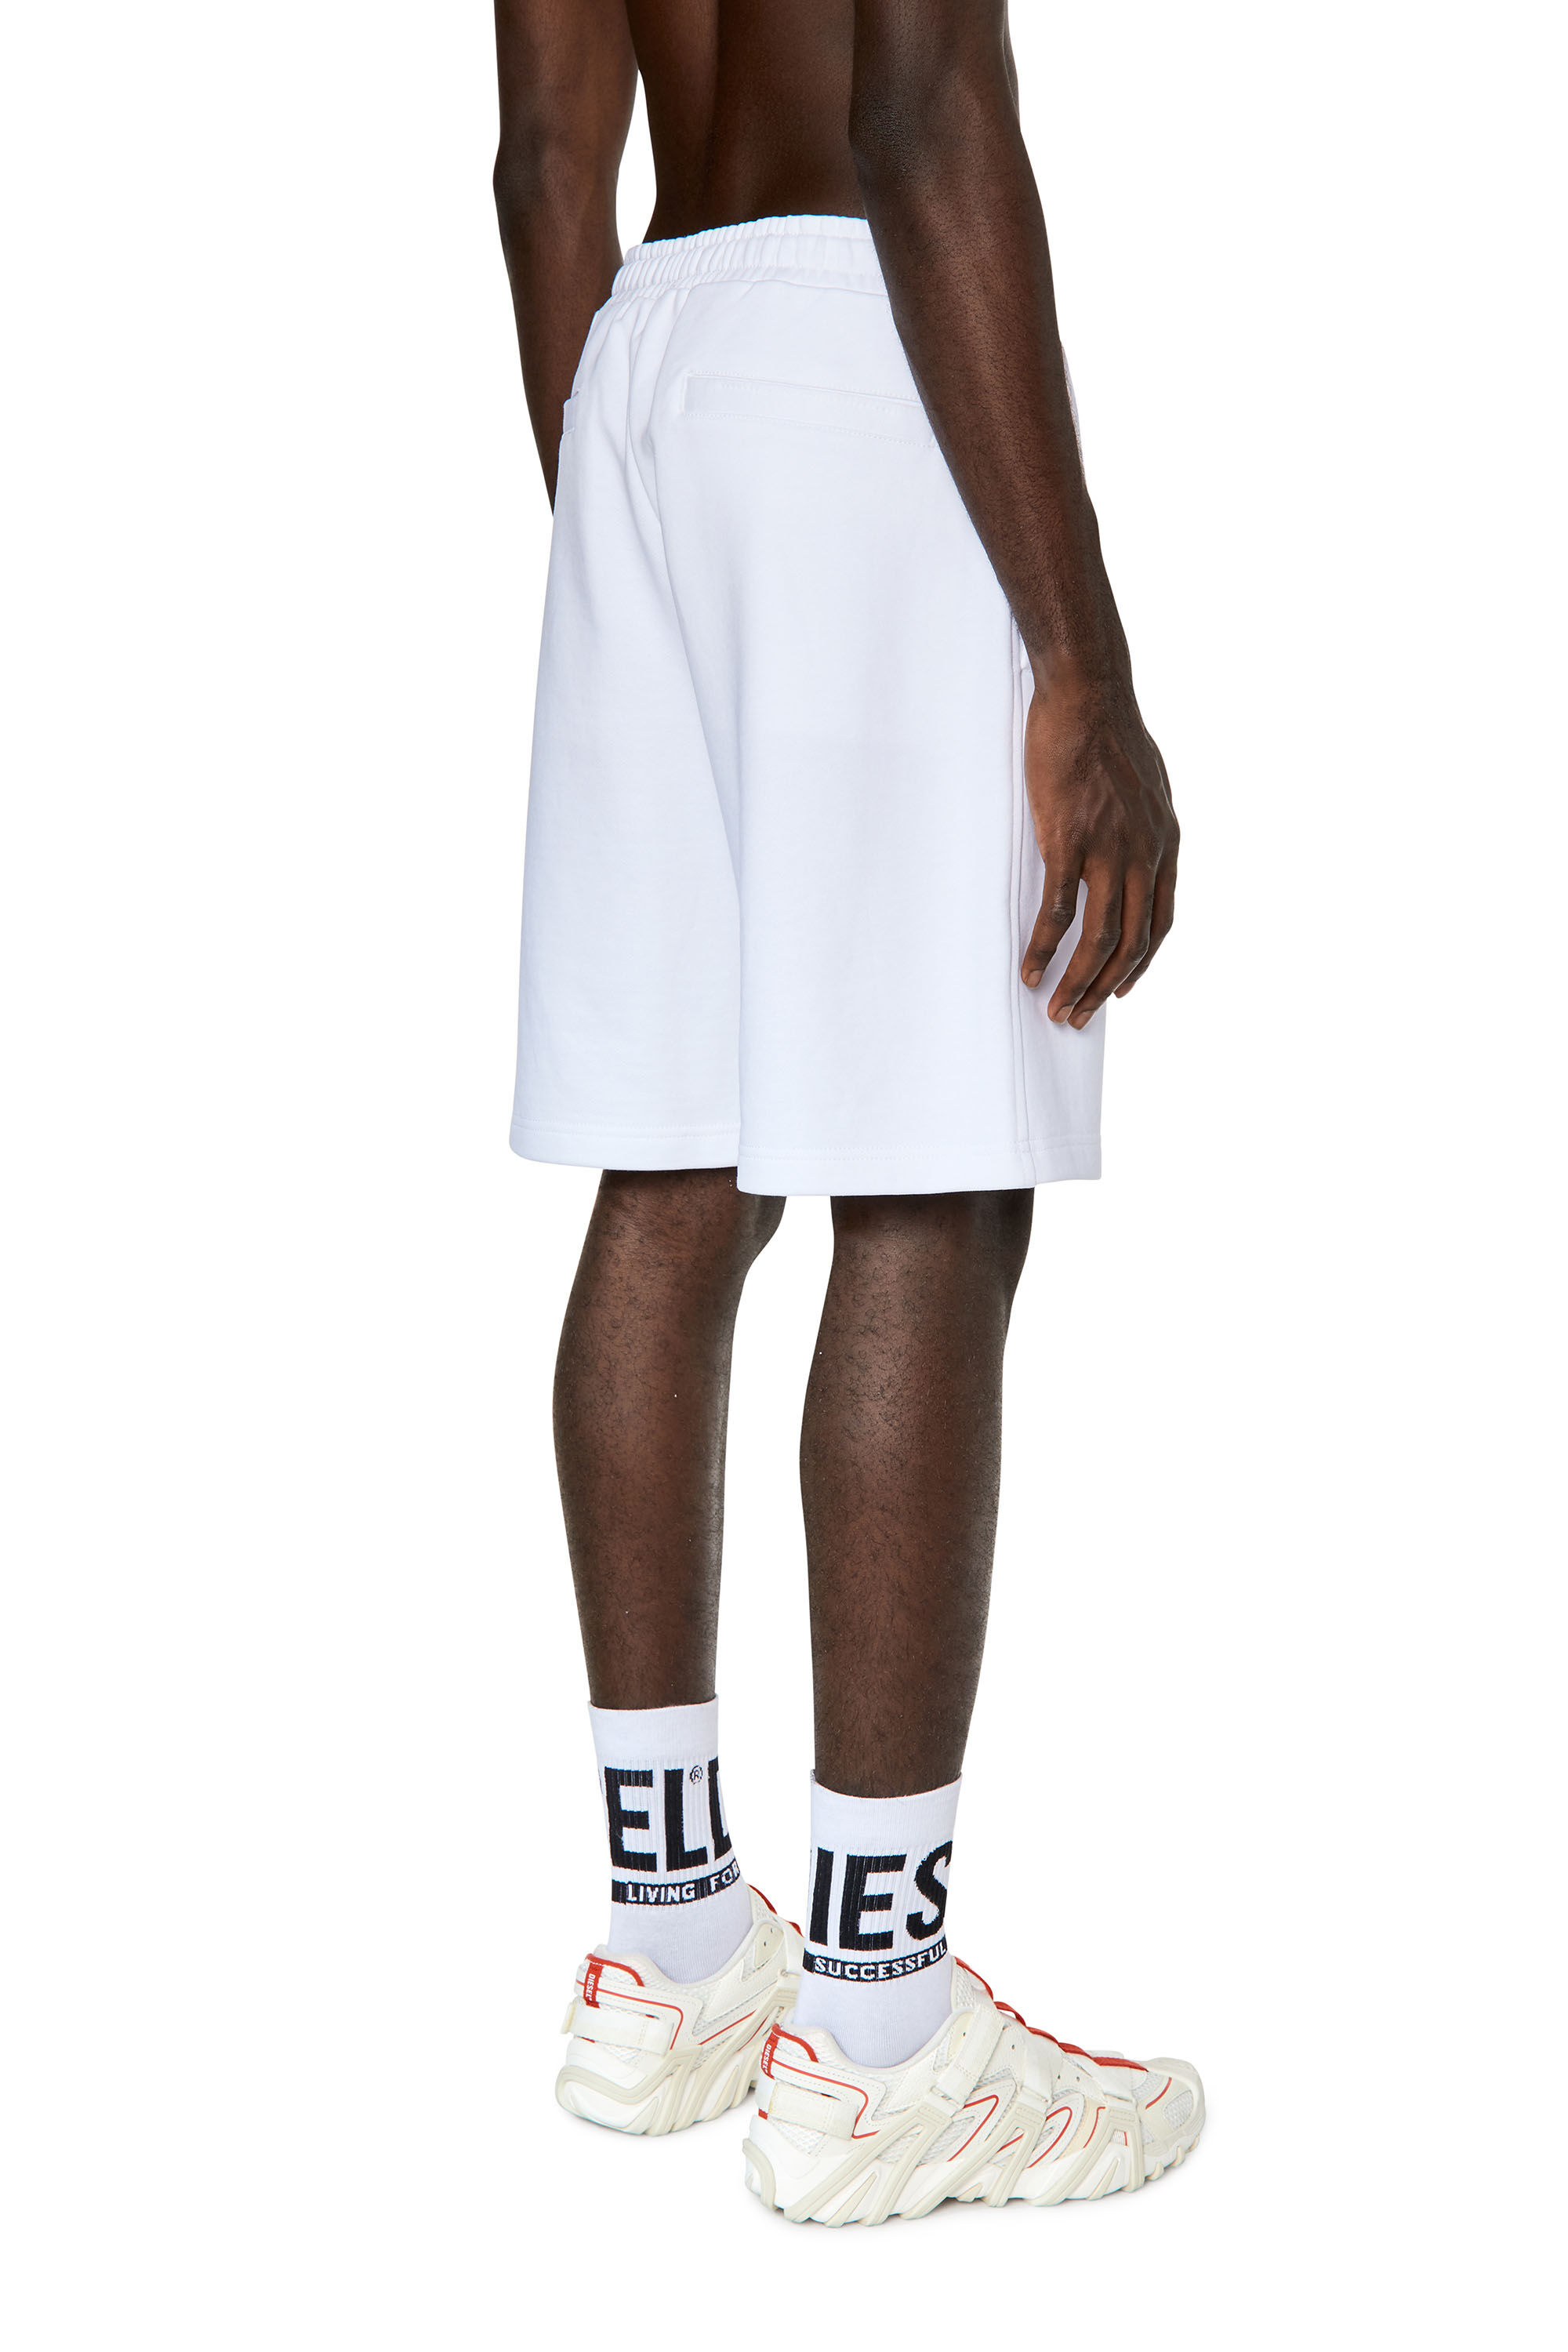 P-CROWN-DIV Man: Sweat shorts with embroidered logo